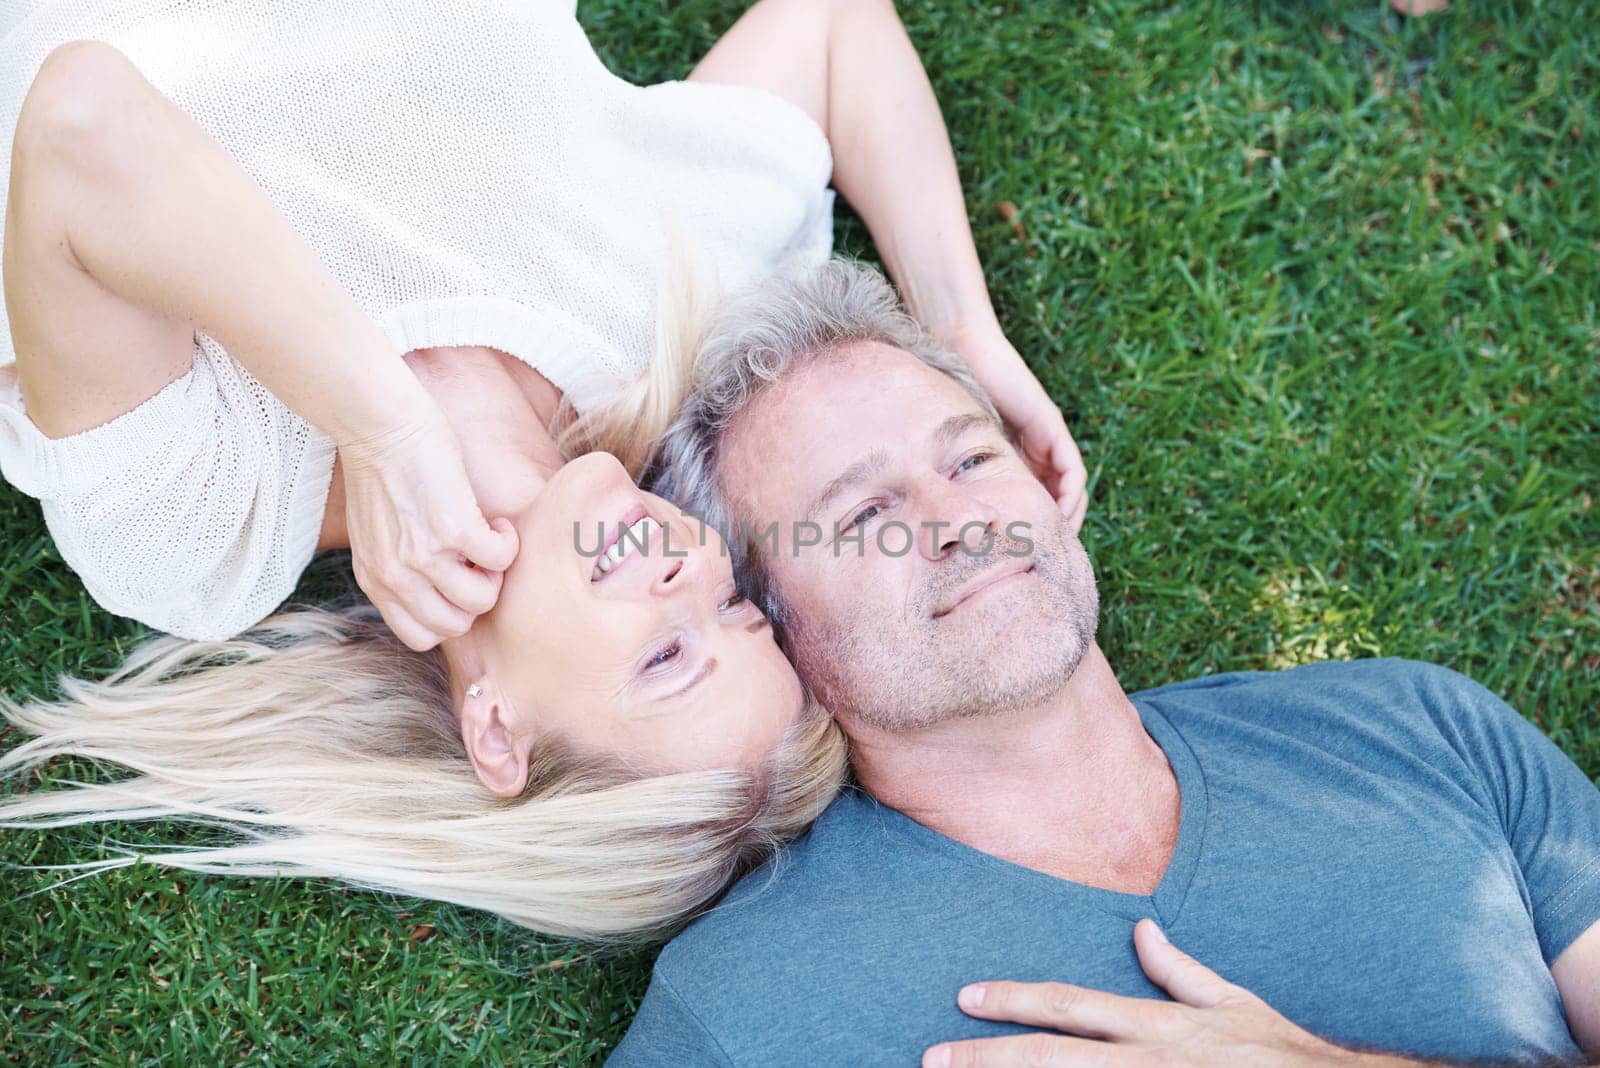 Happy couple, mature and grass or lying relax for relationship date on anniversary, bonding or connection. Man, woman and top view together in New Zealand or garden park for love, resting or summer.